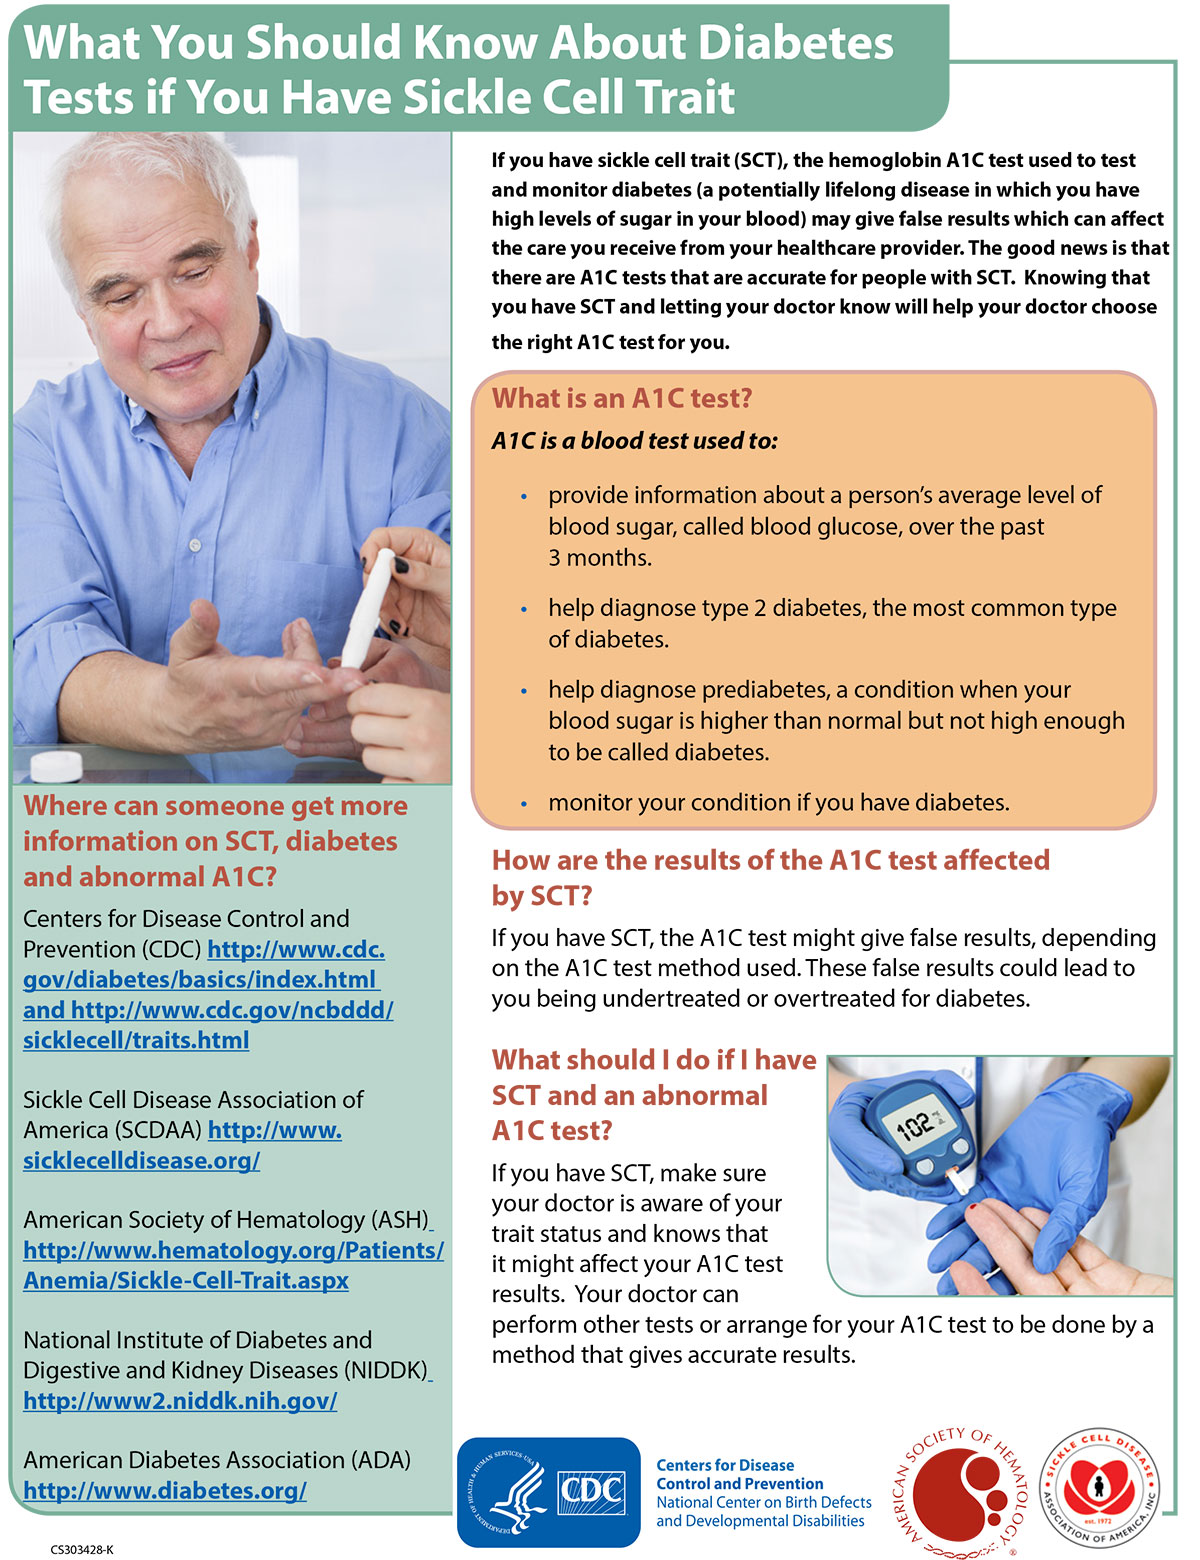 What You Should Know About Diabetes Tests if You Have Sickle Cell Trait - factsheet thumbnail